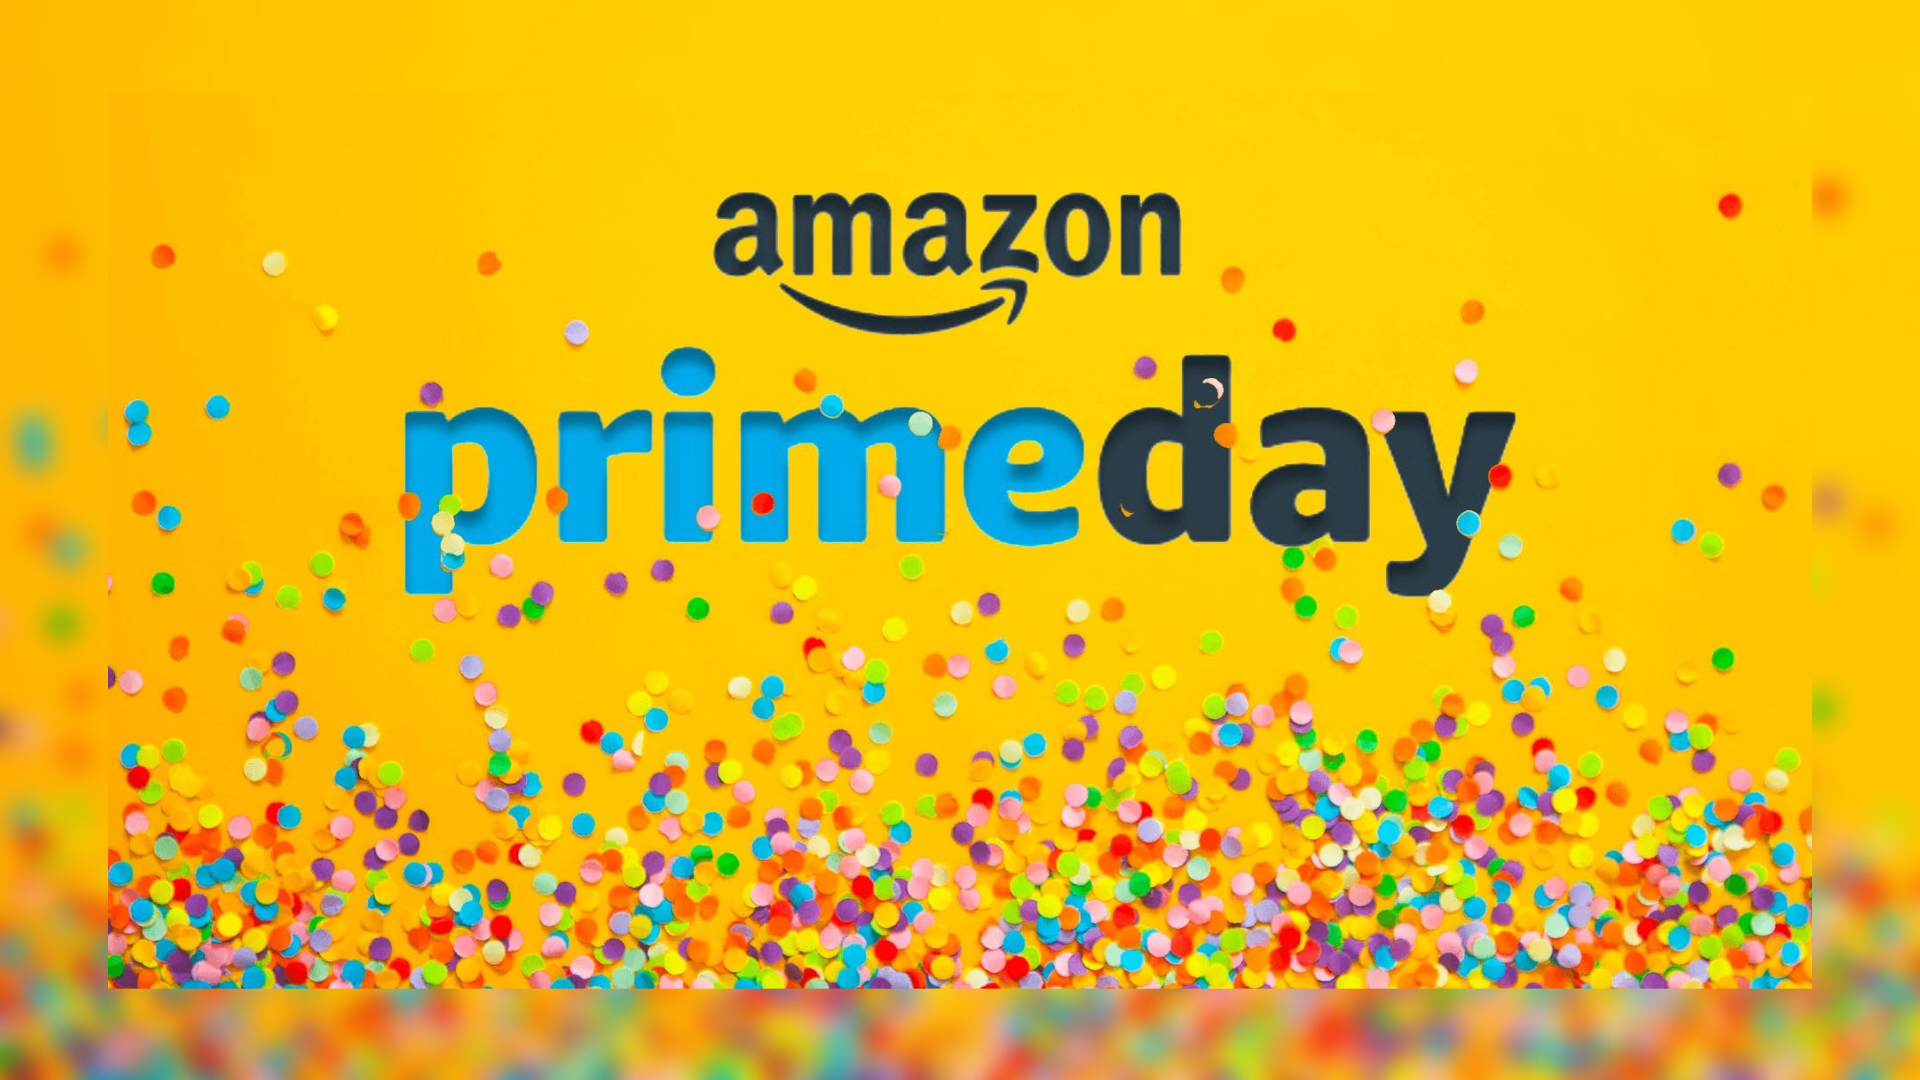 Amazon Prime Early Access Deals and Best Prime Deals 2023 to watch for! All the best deals for kids!